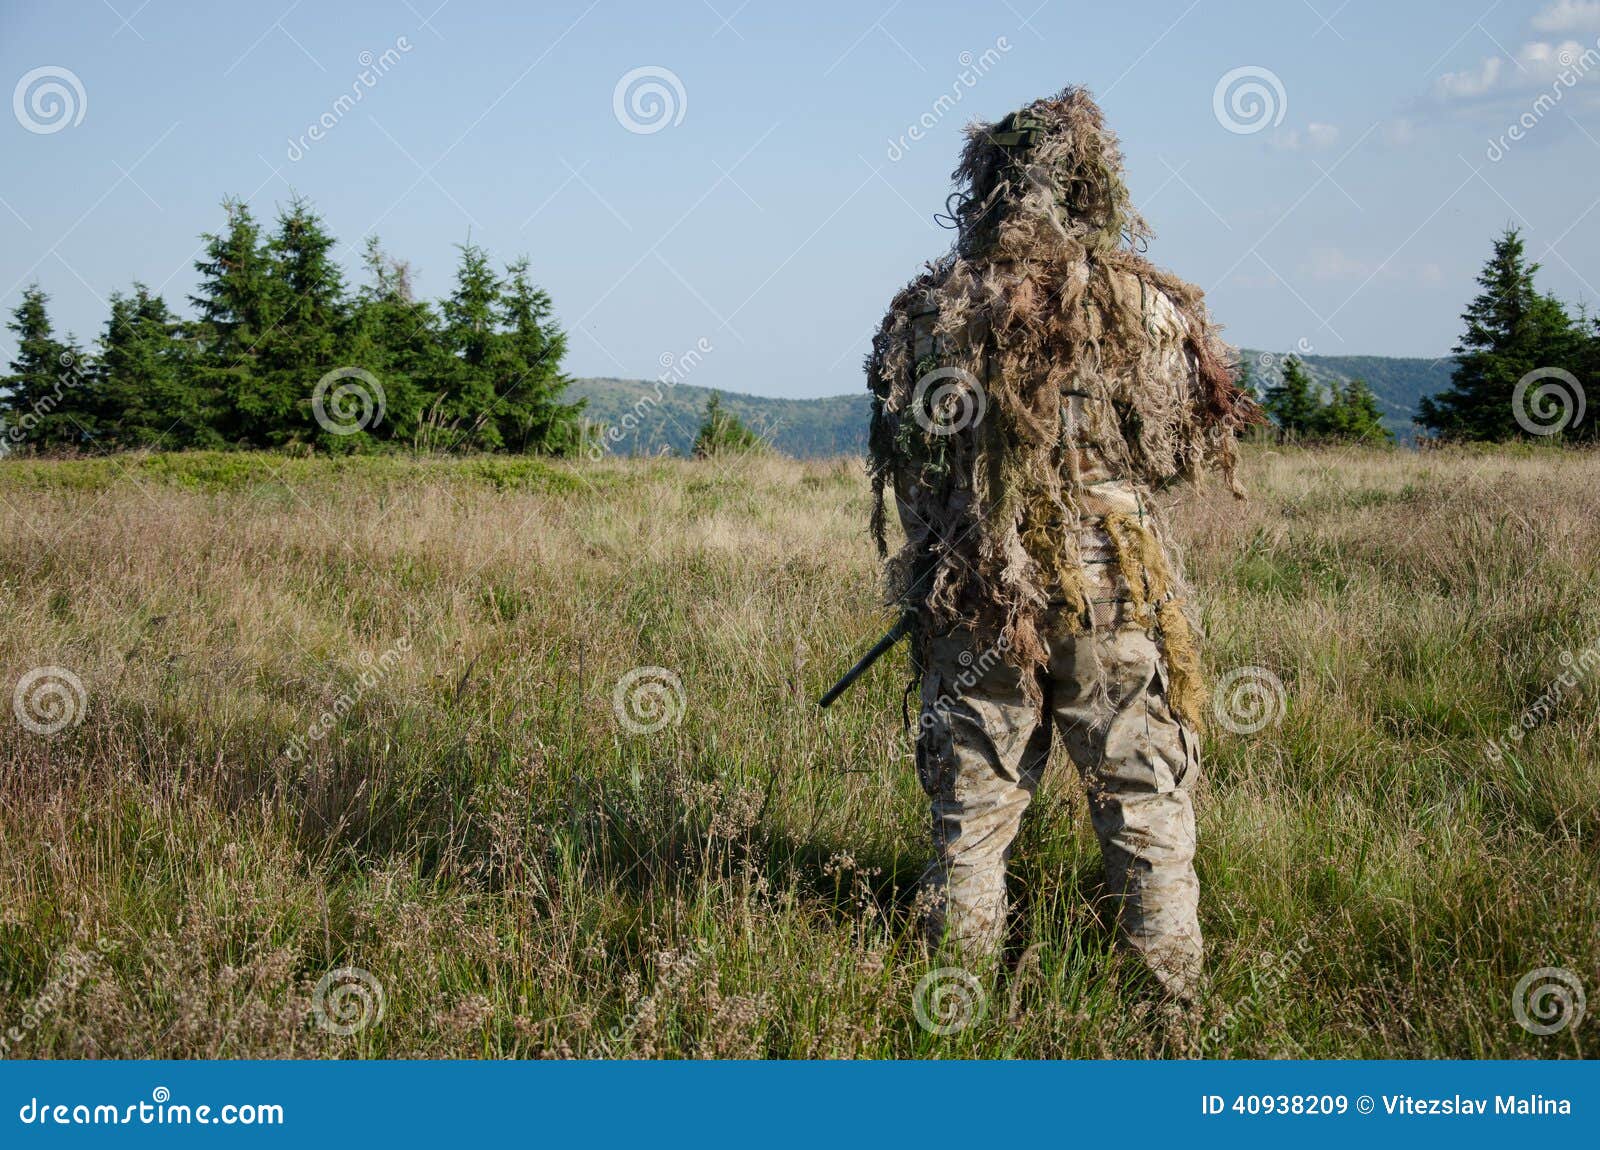 Ghillie suit camouflage hunter or military Vector Image